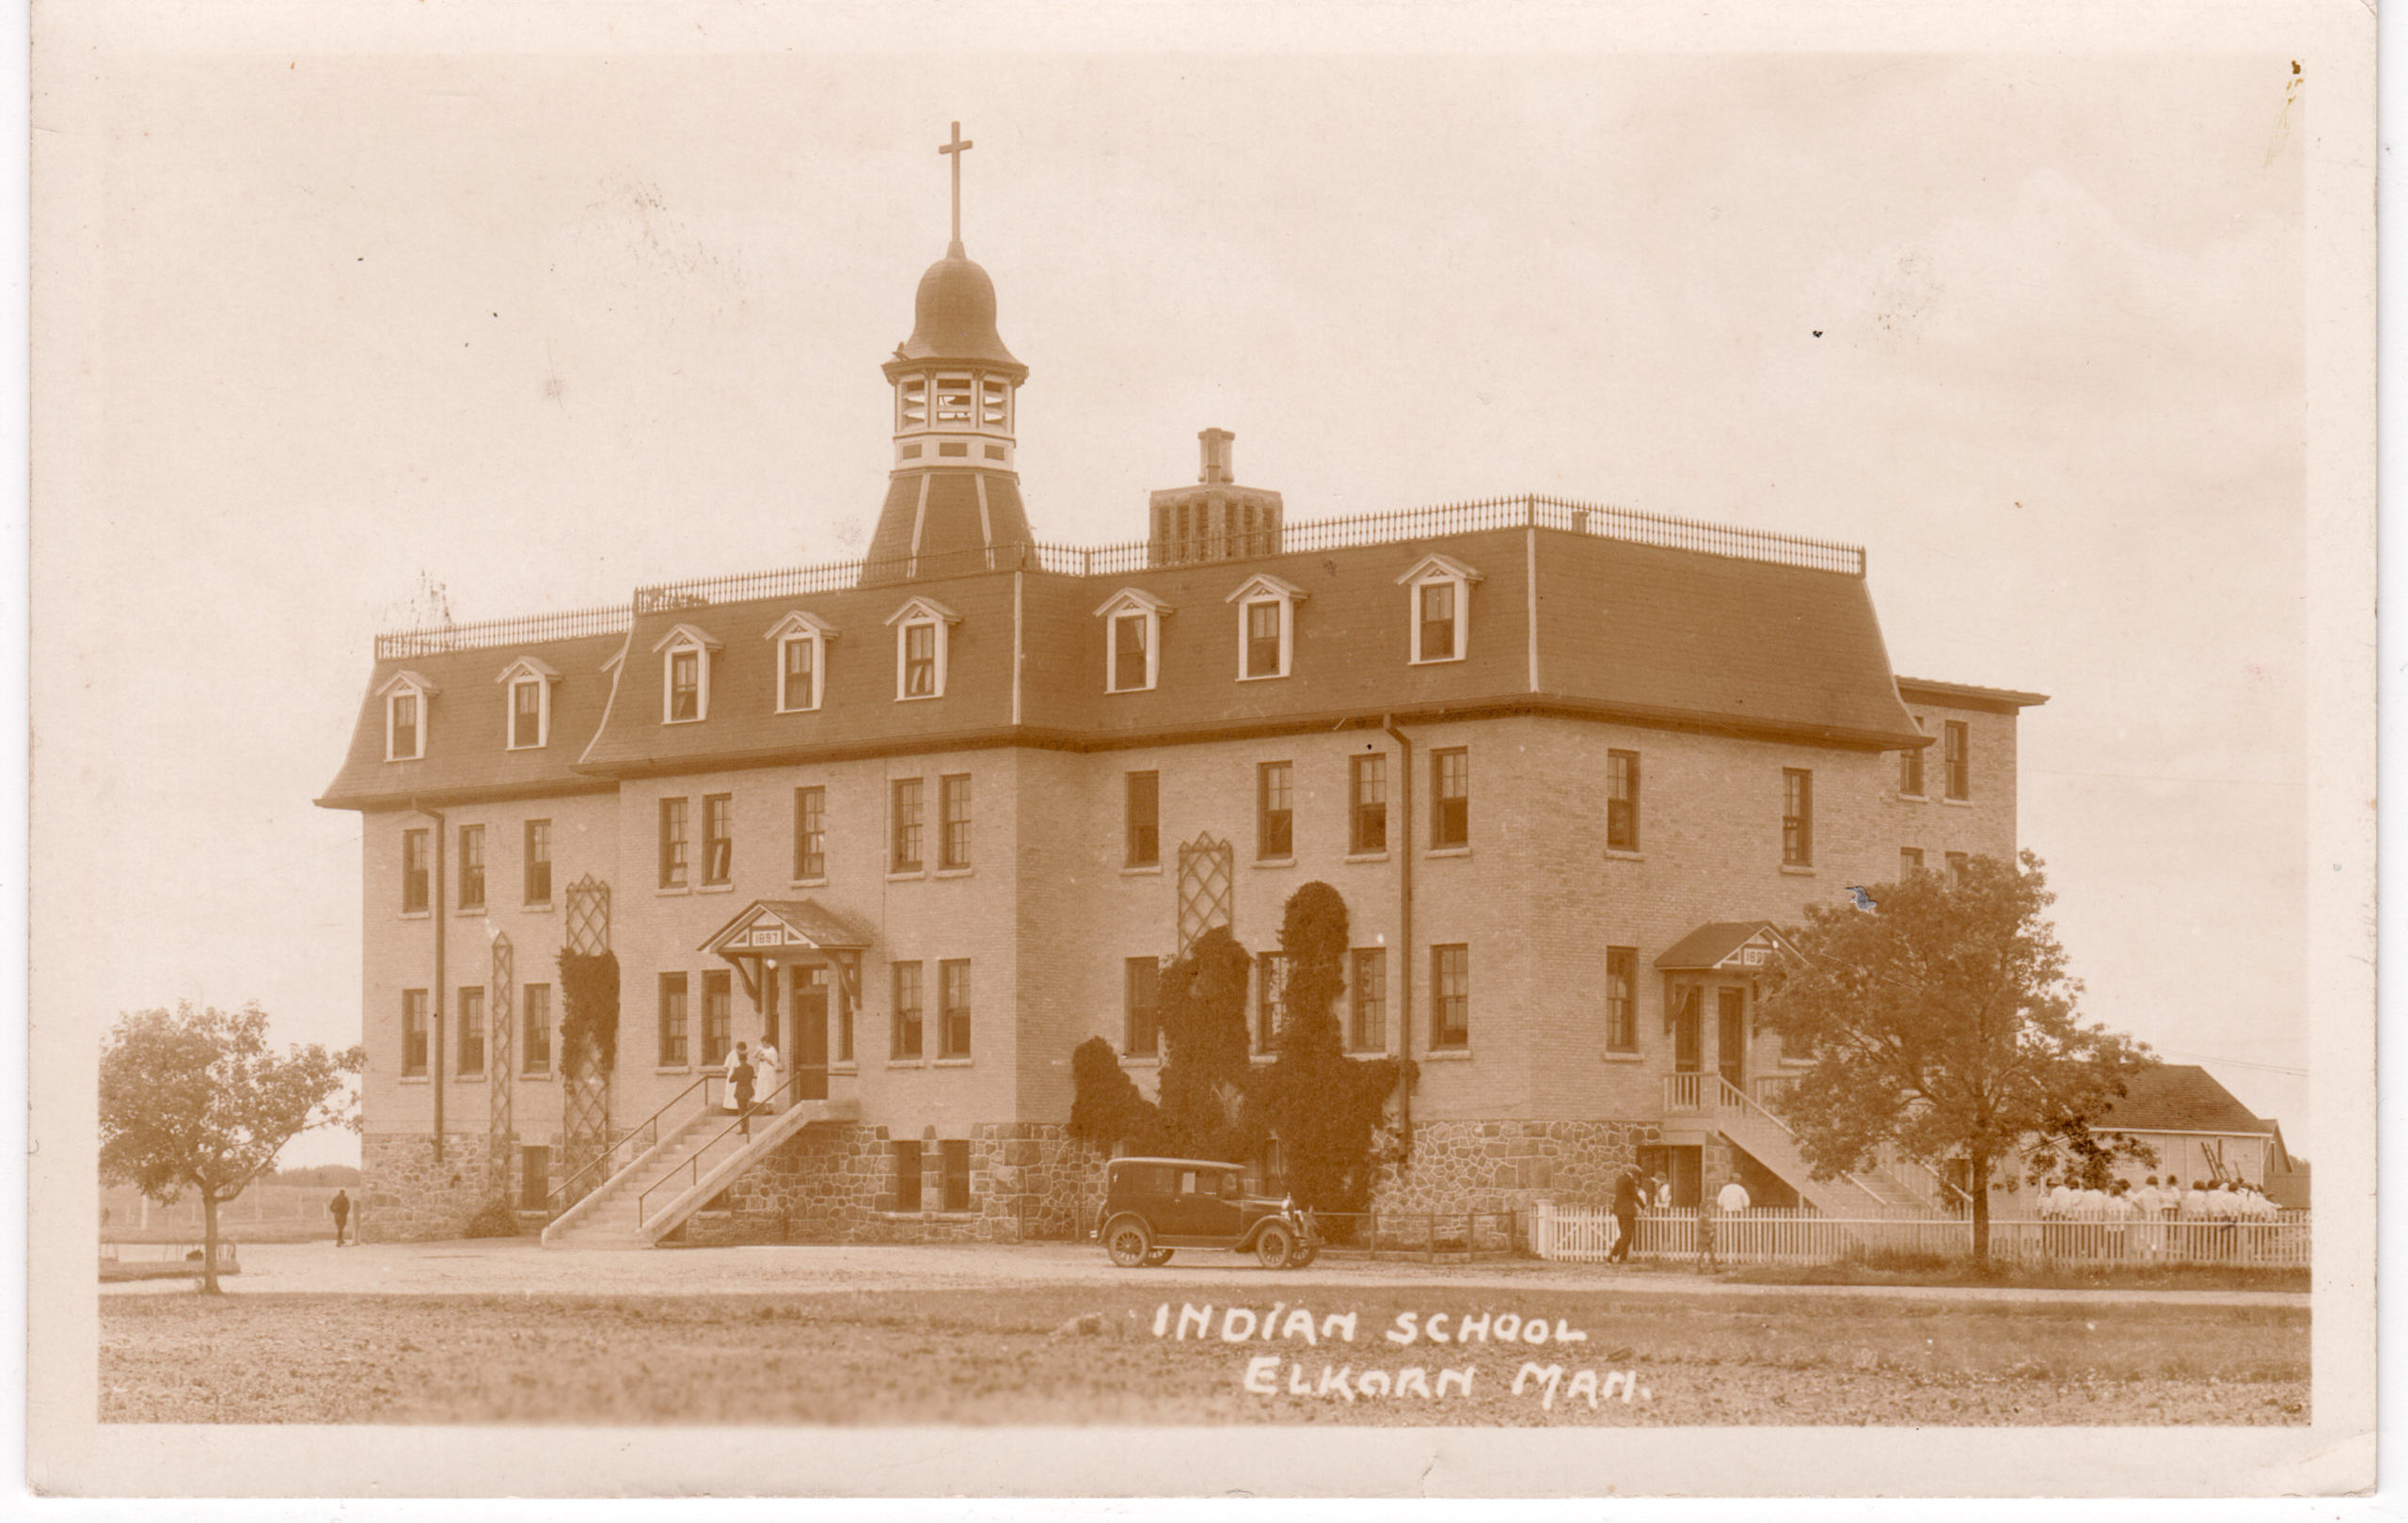 Sepia photograph of a three-storey building with a steeple bearing a cross. A vintage car is parked in front. Handwriting on the photo reads, "Indian School / Elkhorn Man".